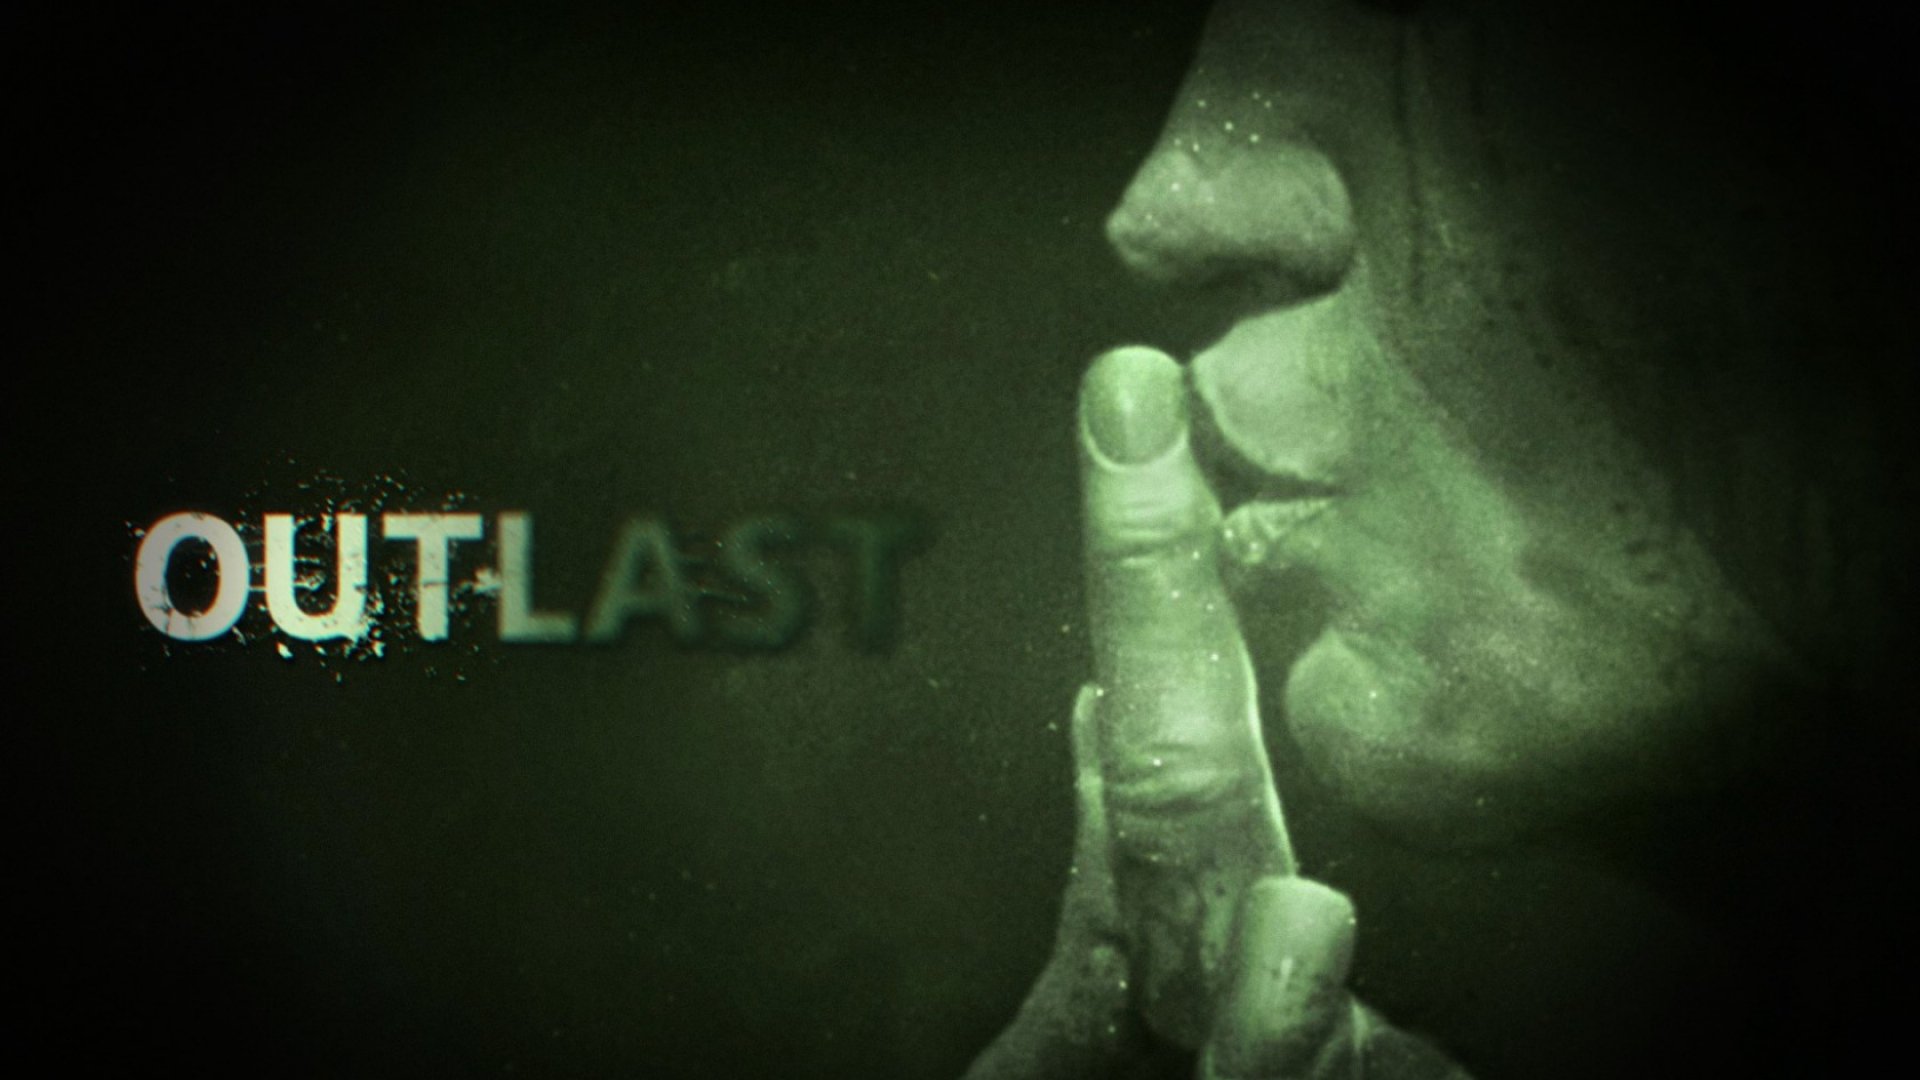 download outlast xbox